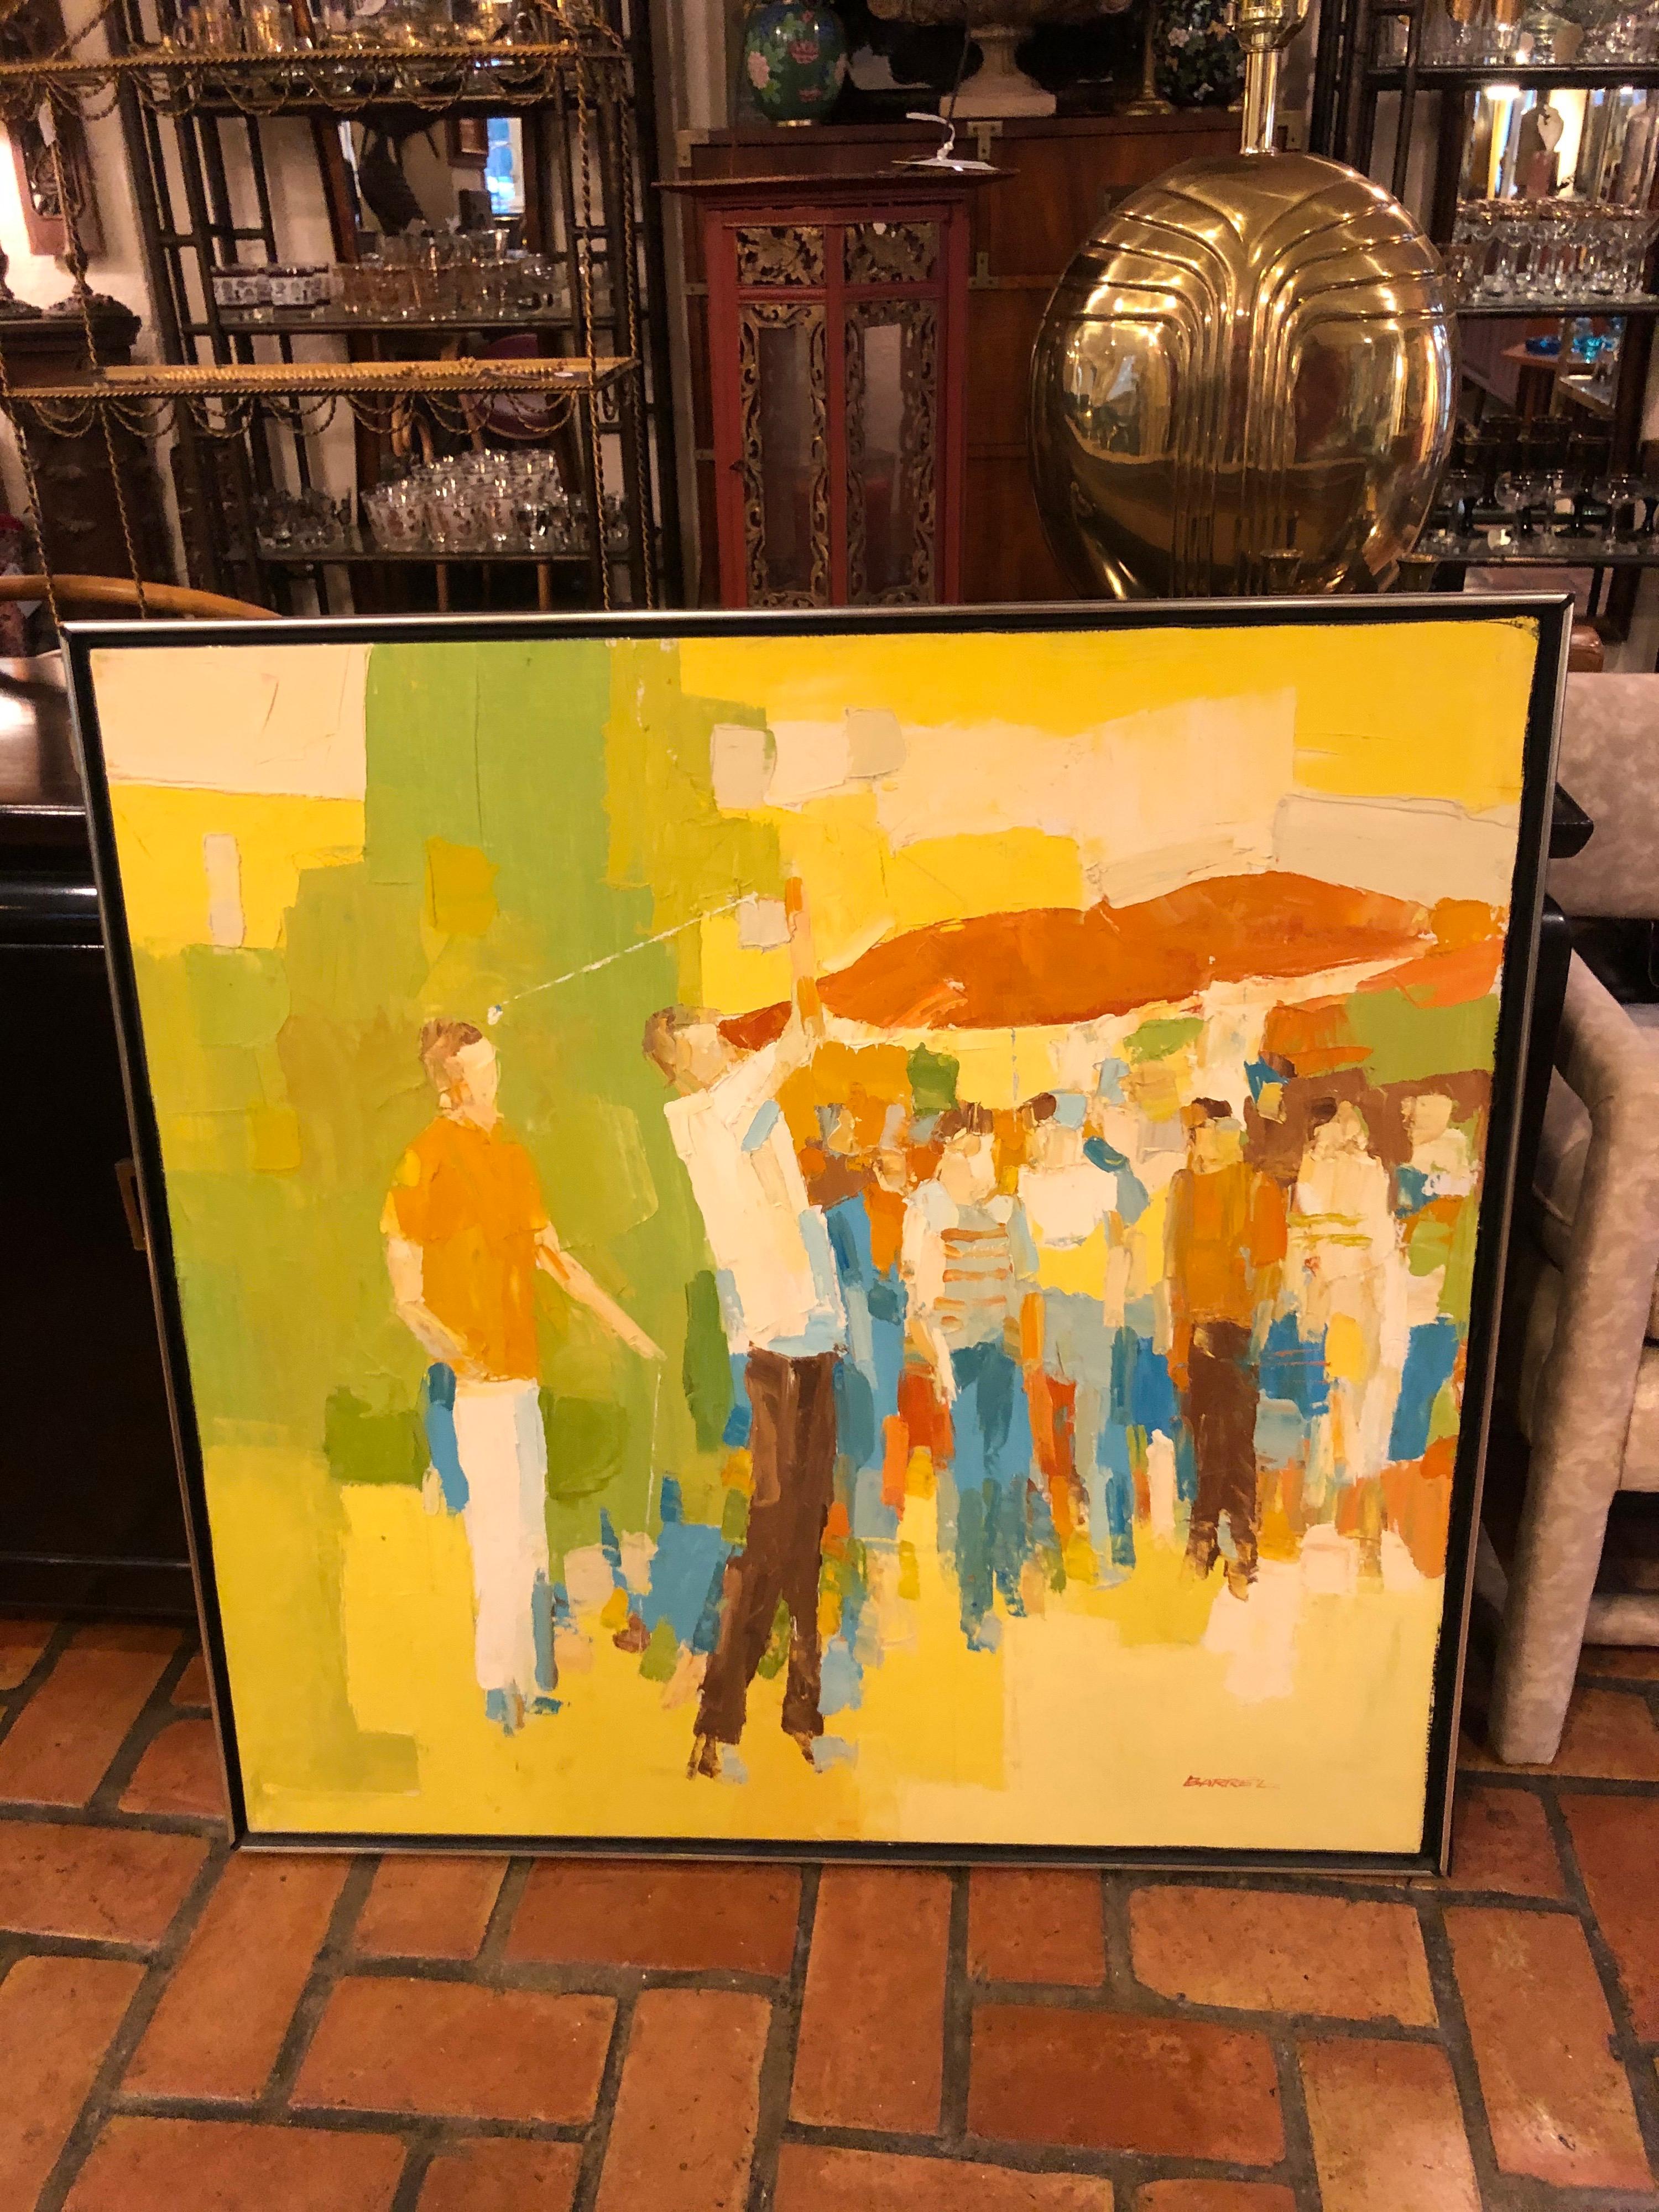 Mid-Century Modern large impasto painting of golfers by Italo Botti. . Also known as George Botti and or George Barrell. Incredible detail and heavy paint characteristic of Italo Botti's style. Intense composition of golfers in action surrounded by